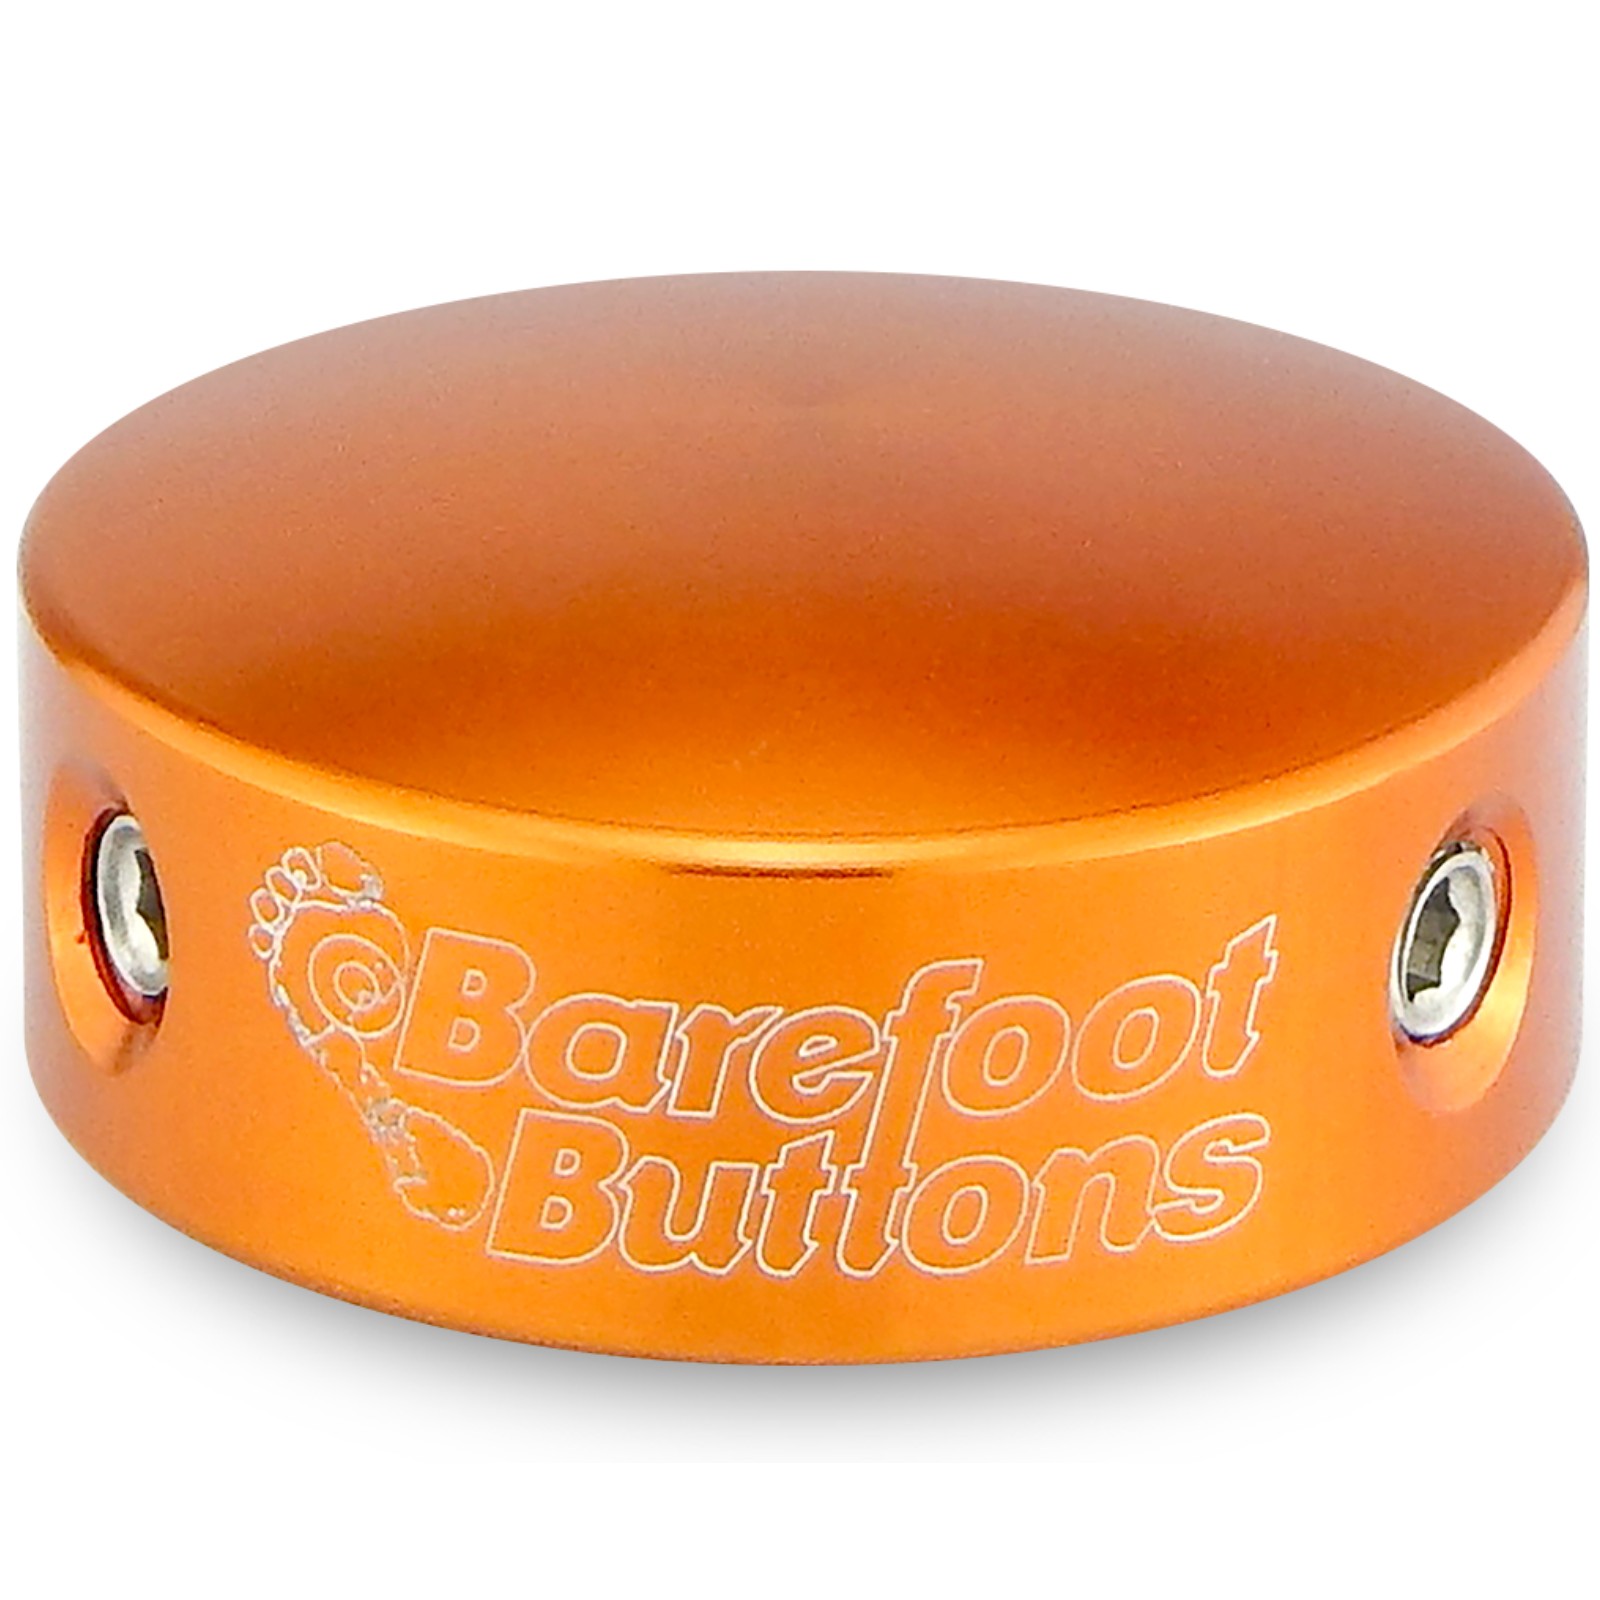 Barefoot Buttons, Barefoot Buttons V2 Standard Footswitch Cap (Orange)